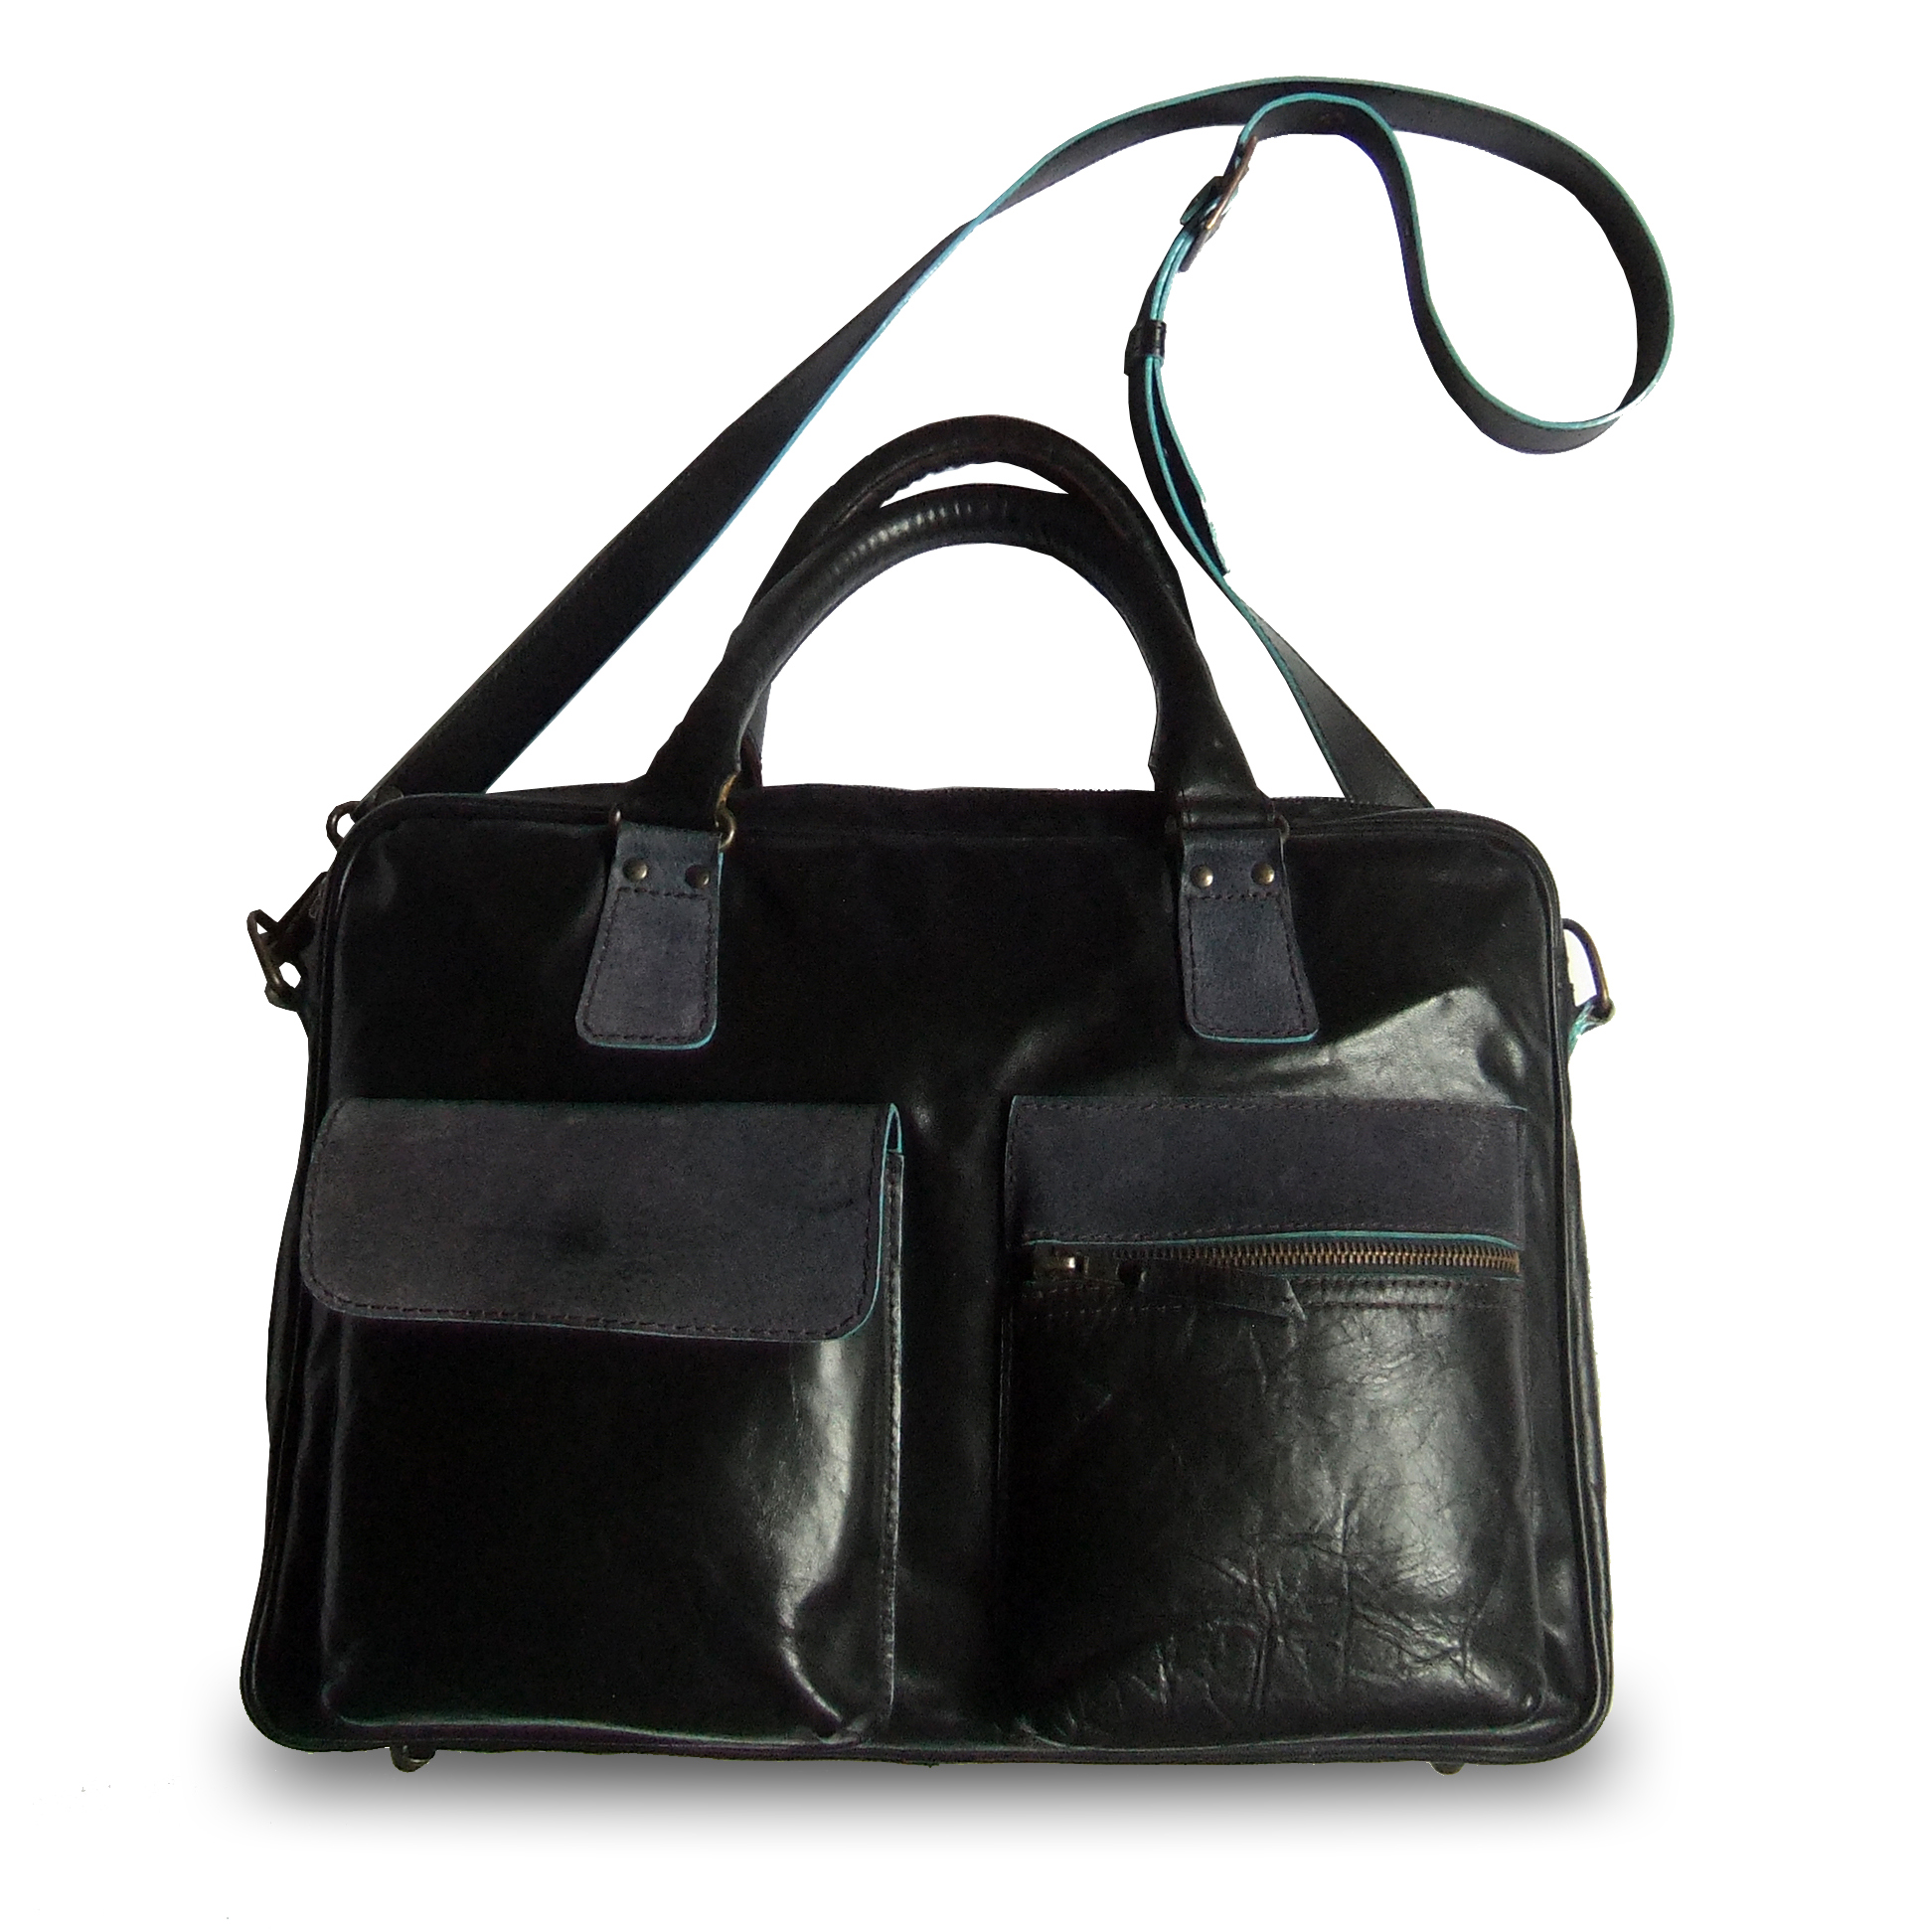 Sac homme トート バッグ メンズ